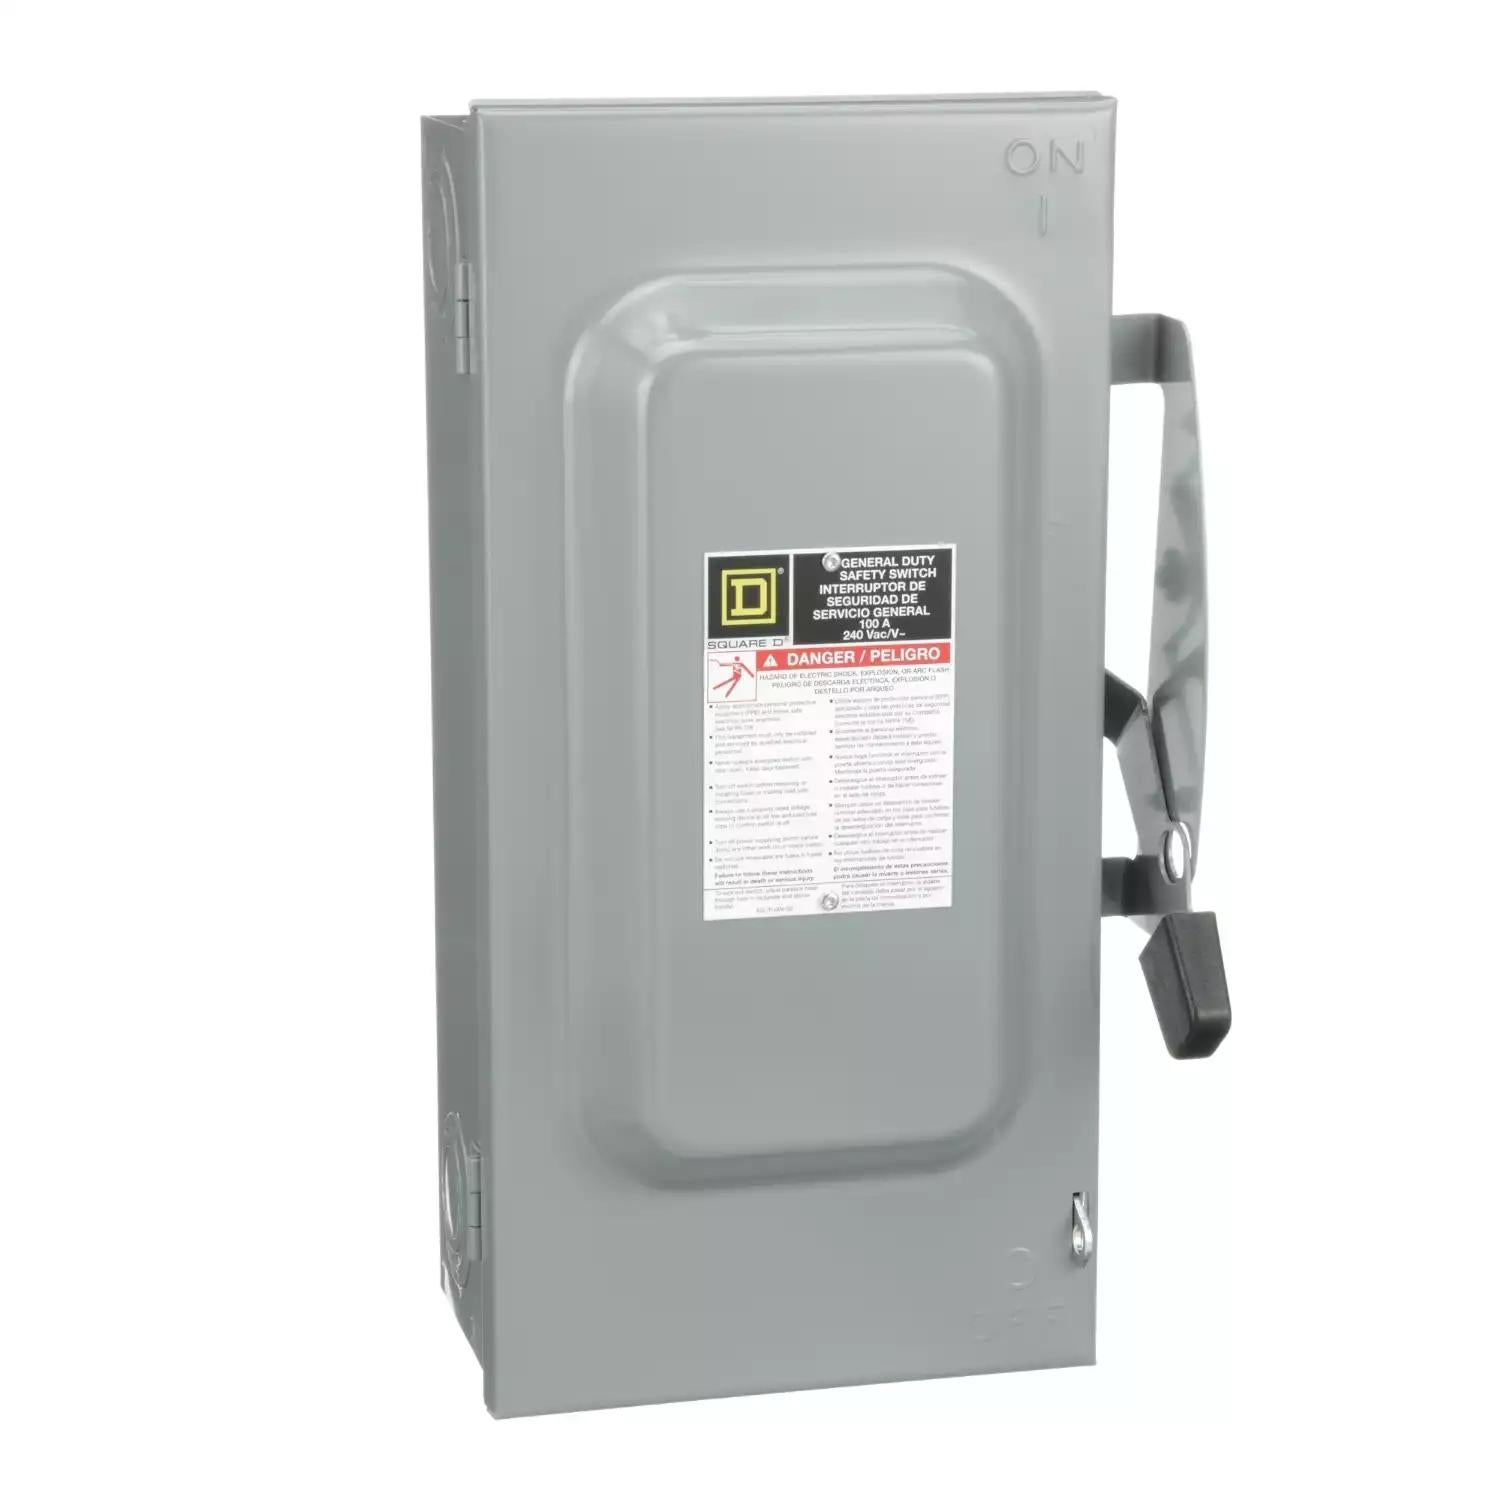 Safety switch, general duty, fusible, 100A, 2 poles, 30 hp, 120 VAC, NEMA 1, neutral factory installed